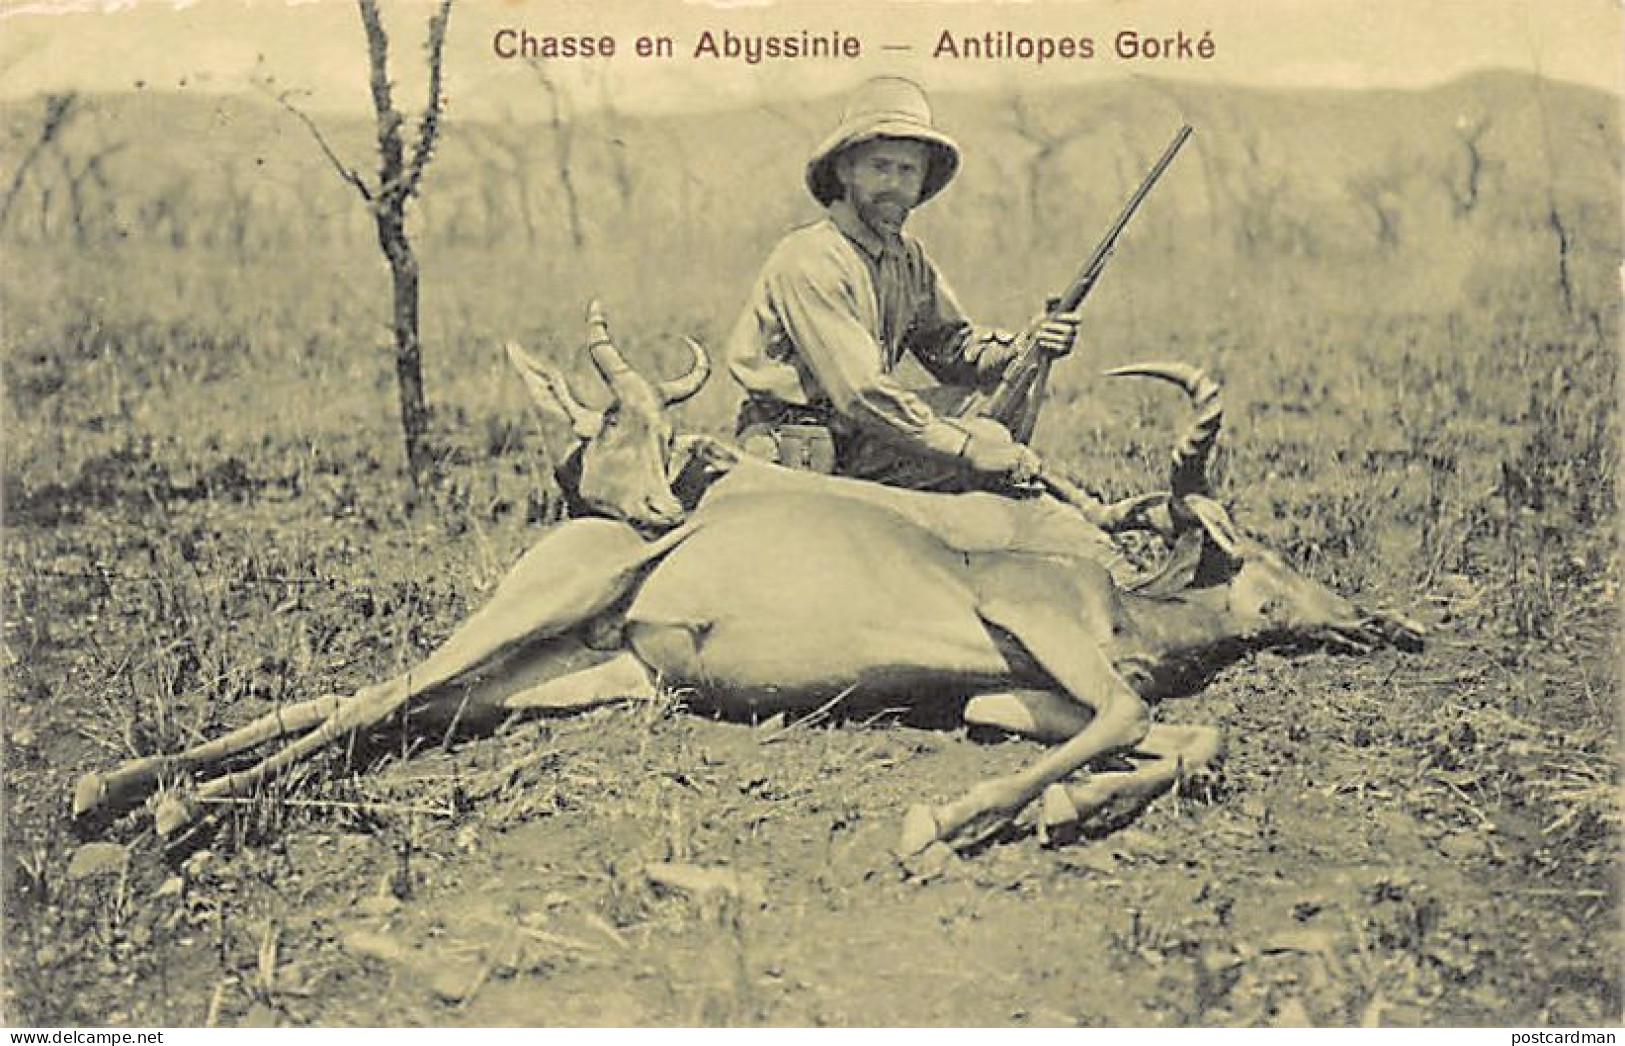 Ethiopia - Hunting In Abyssinia - Gorke Antelopes - Publ. J. A. Michel 6869 - Äthiopien